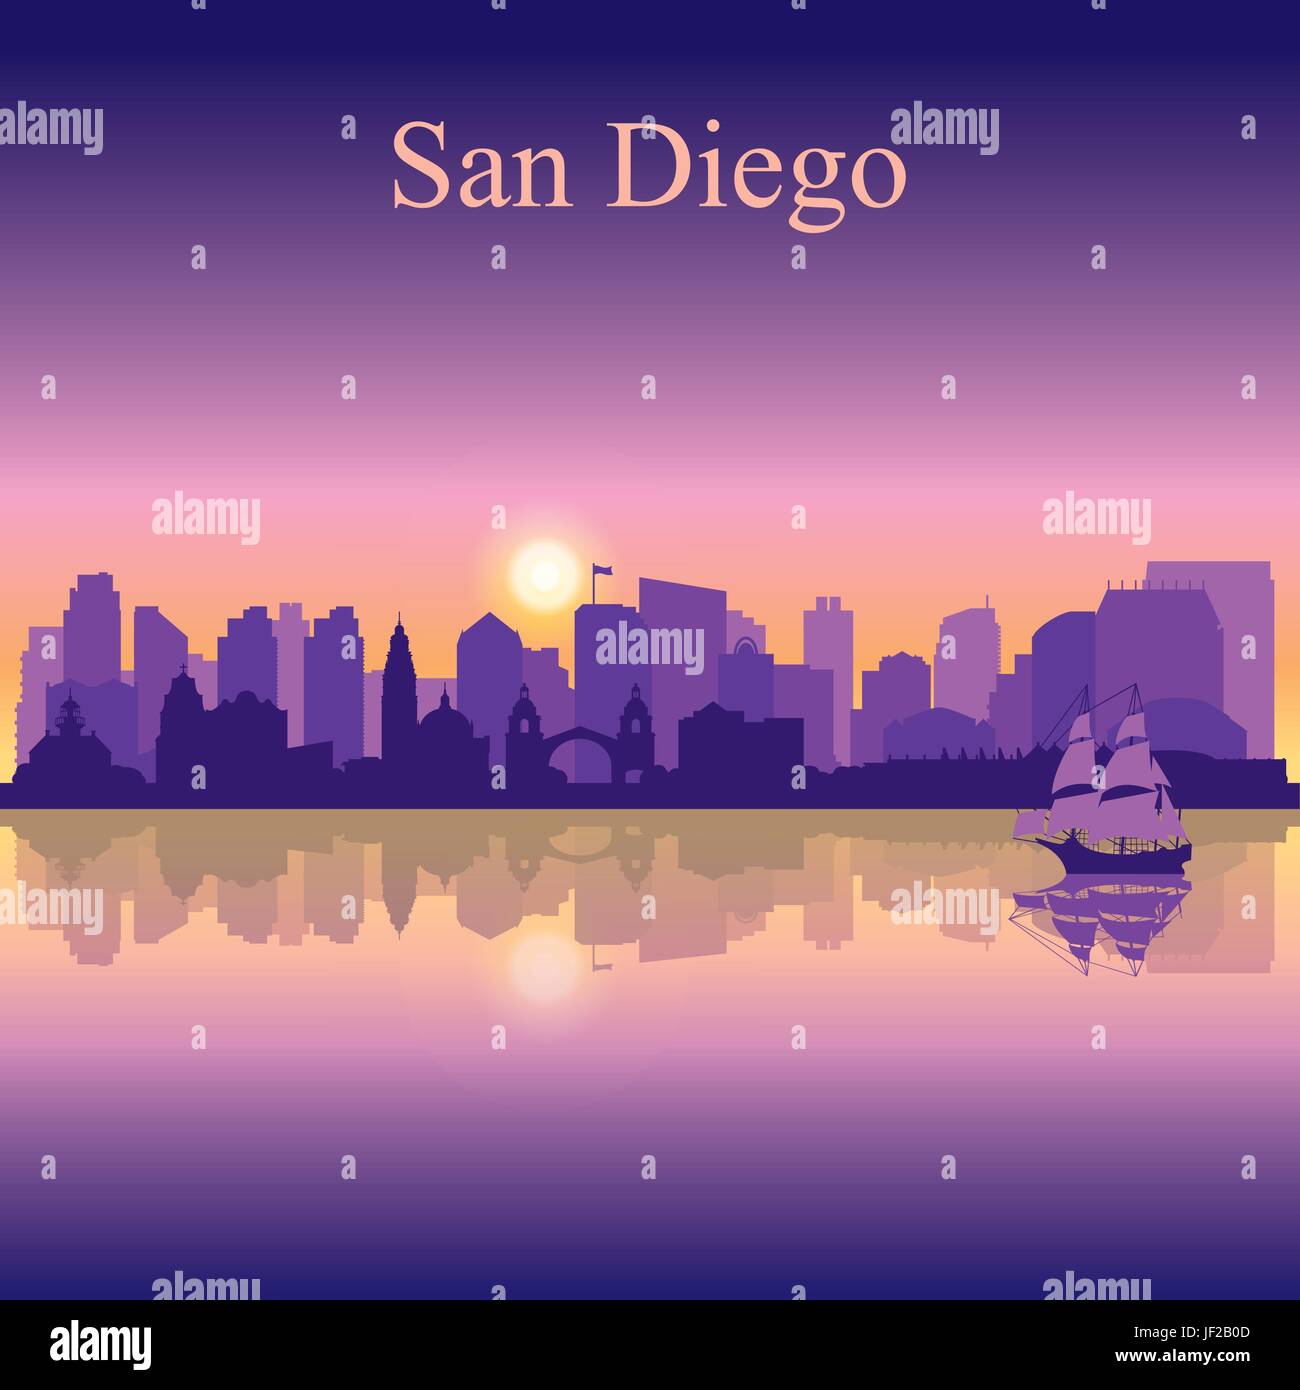 San Diego silhouette on sunset background, vector illustration Stock Vector